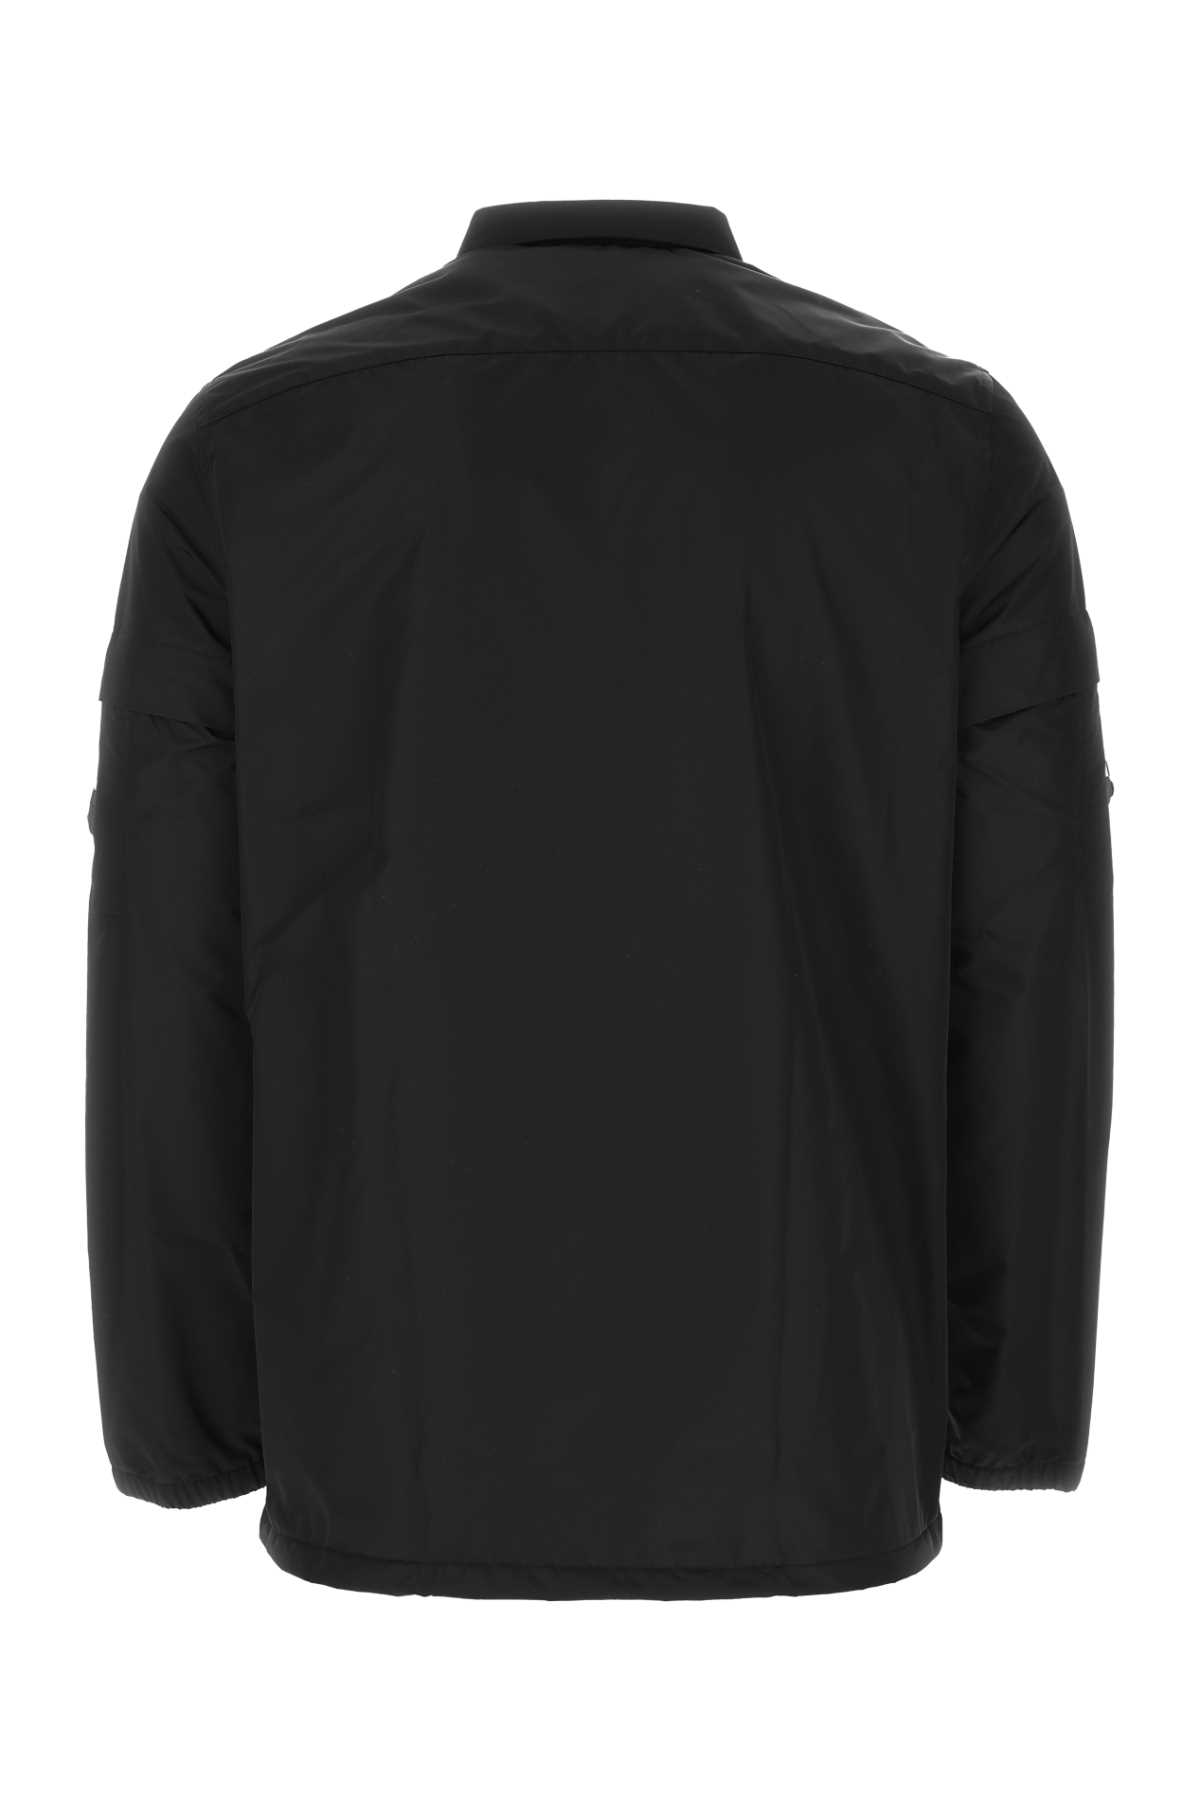 Givenchy Black Polyester Shirt In 001